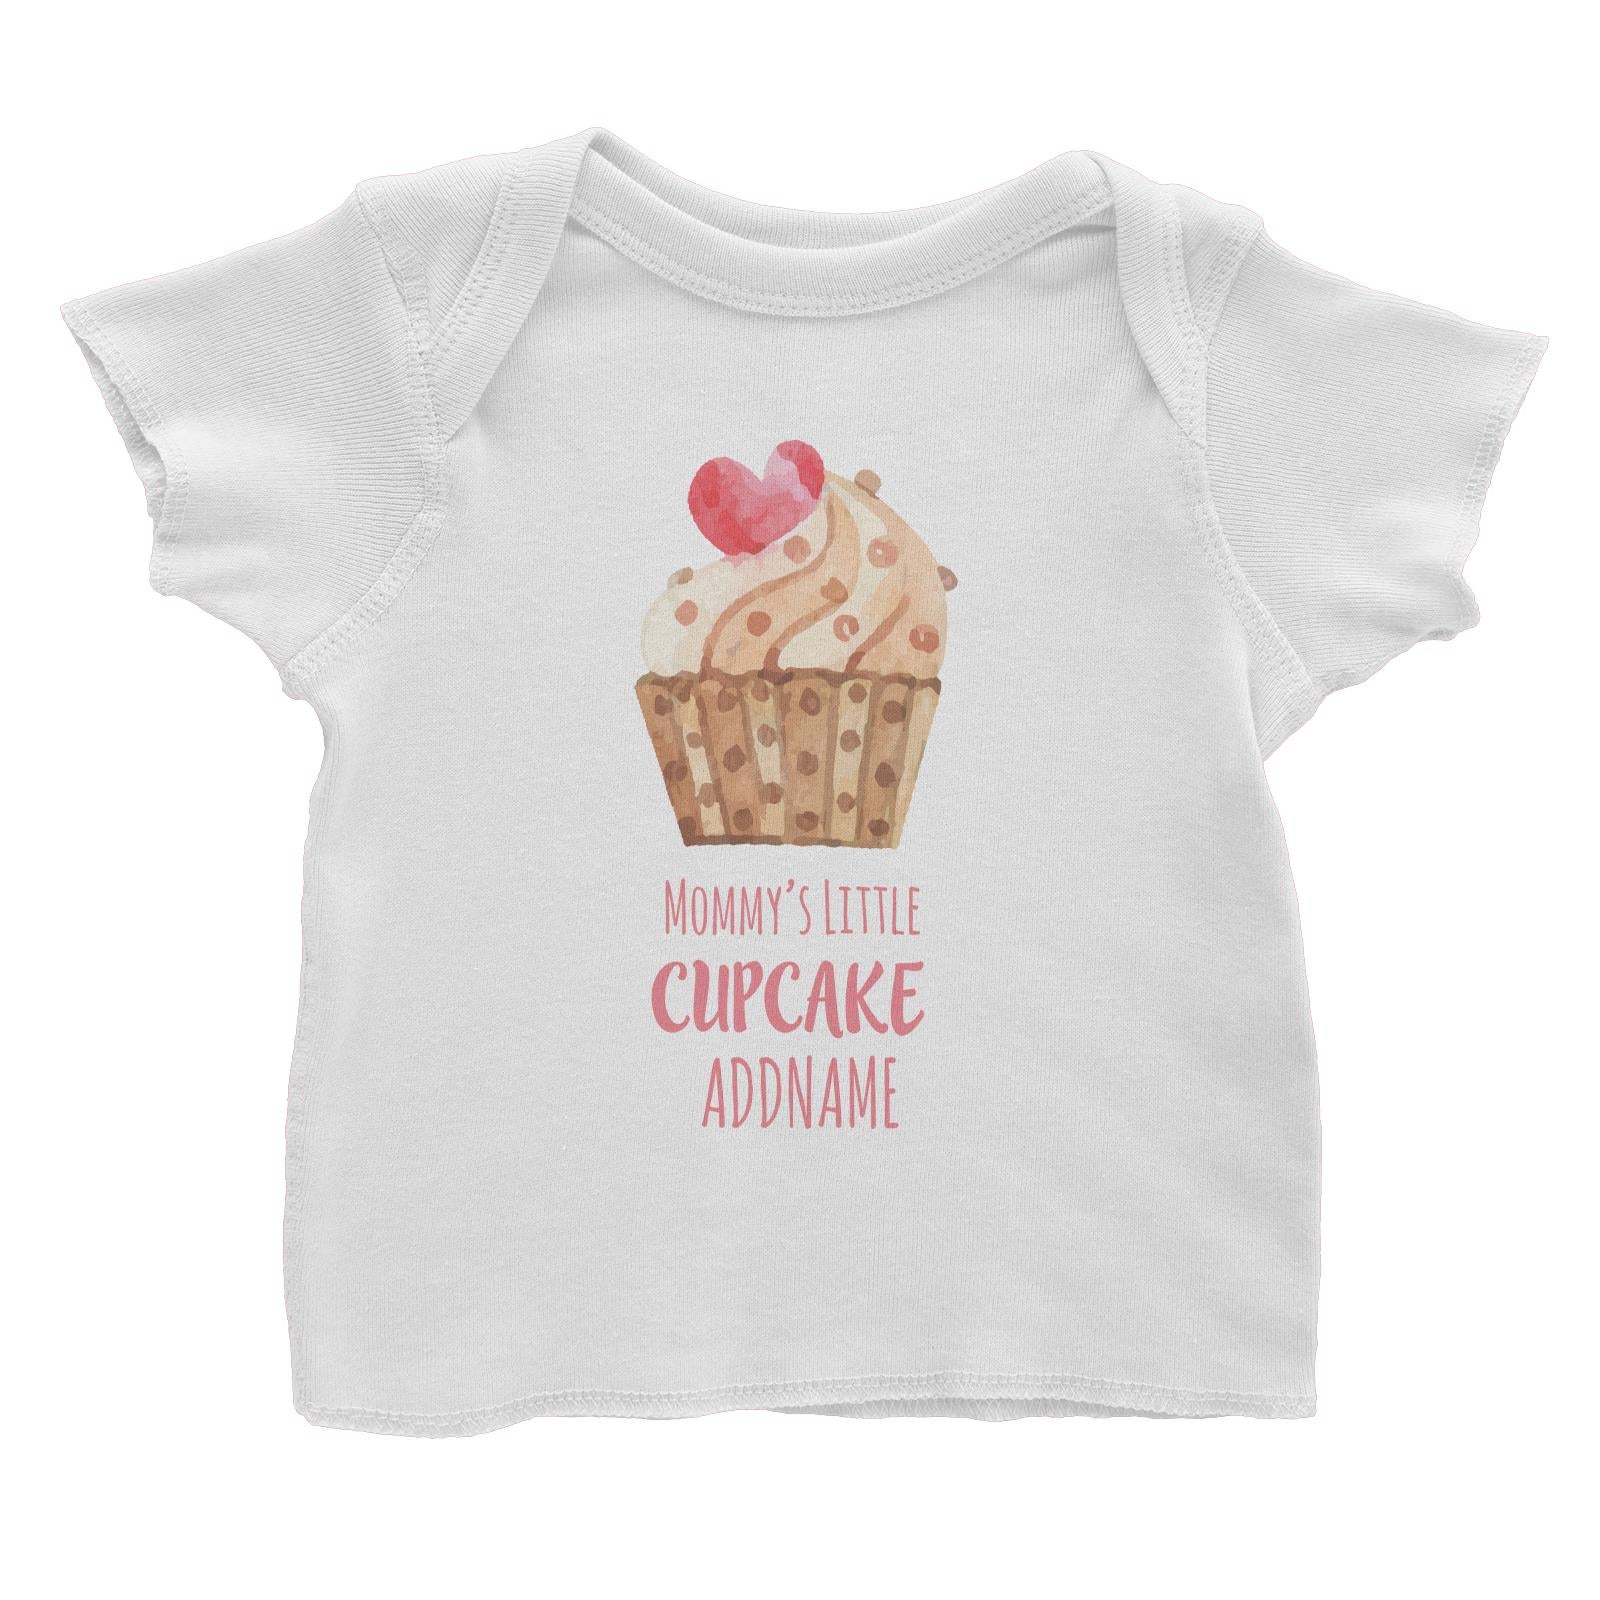 Mommys Little Cupcake White Baby T-Shirt